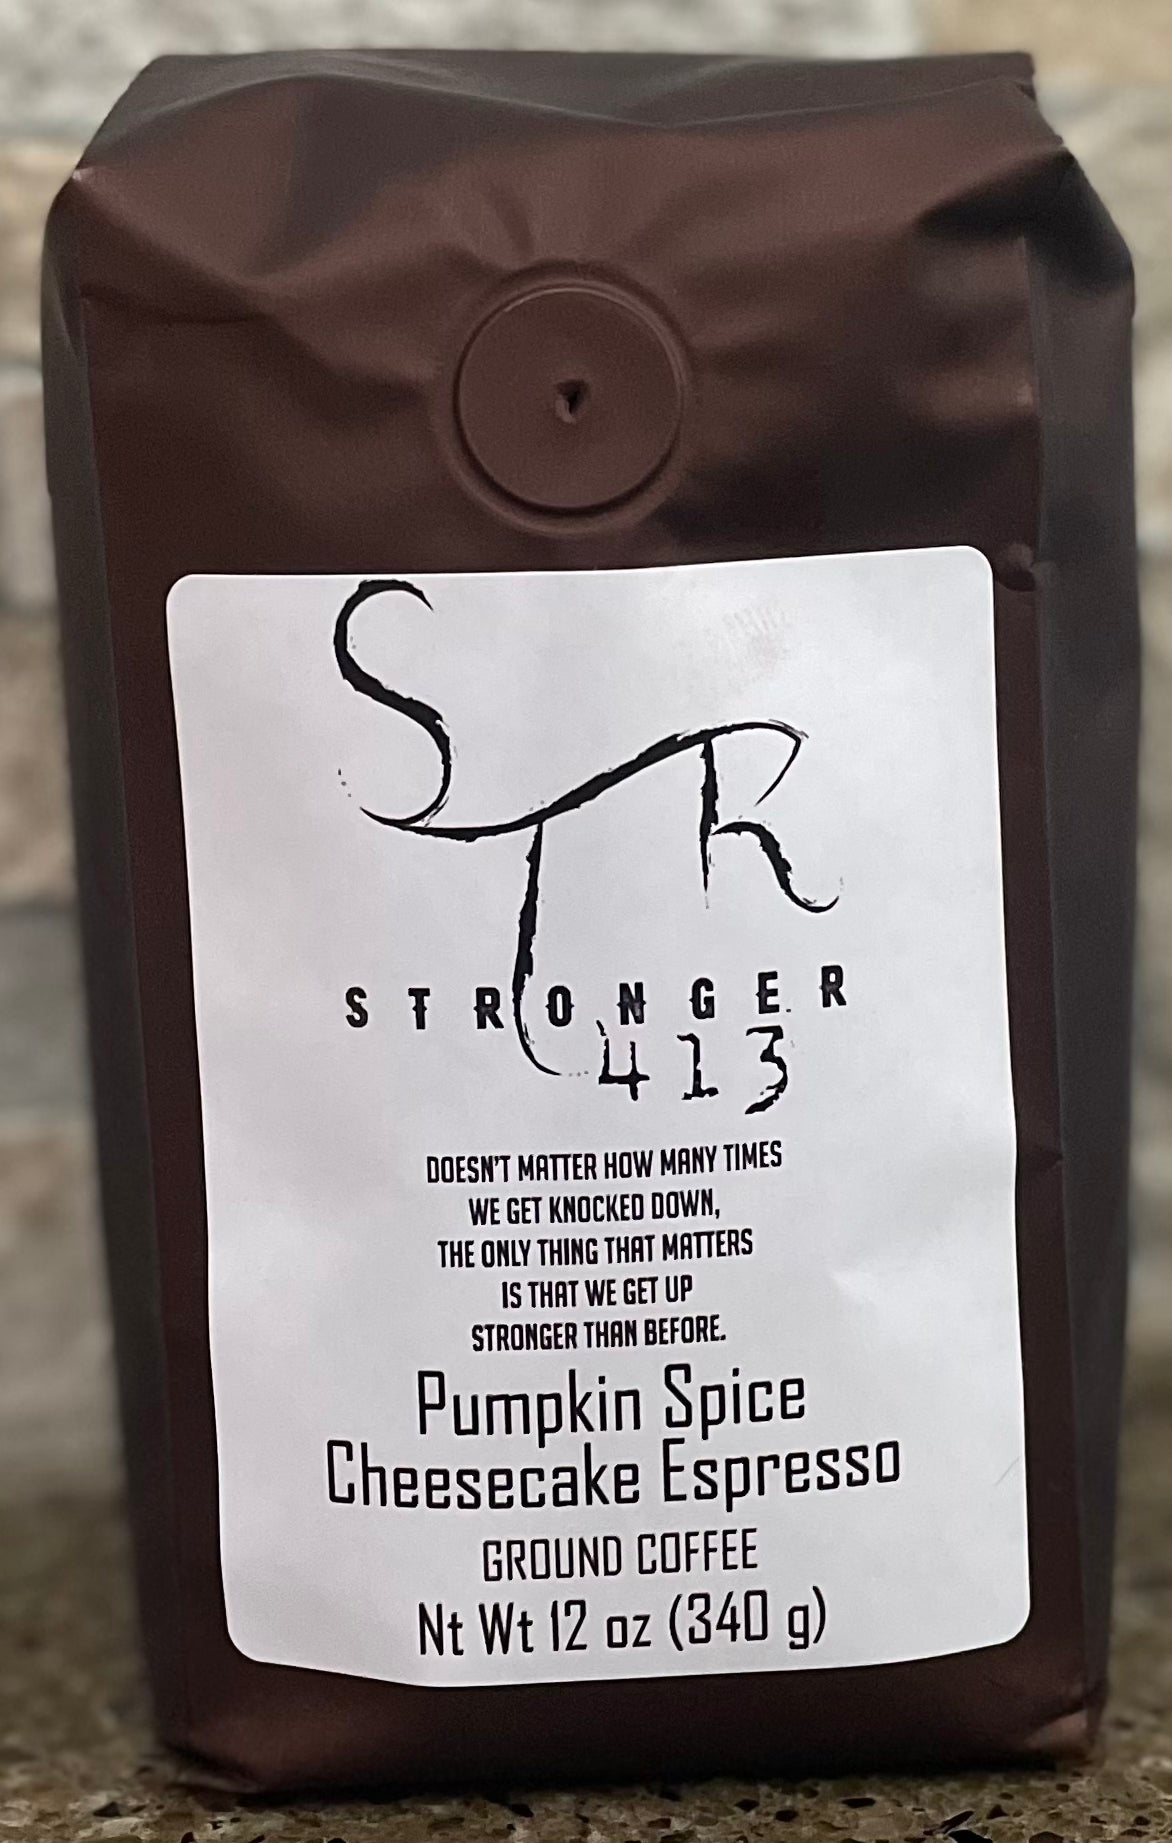 ***FOR A LIMITED TIME*** PUMPKIN SPICE CHEESECAKE ESPRESSO 12oz Ground Coffee